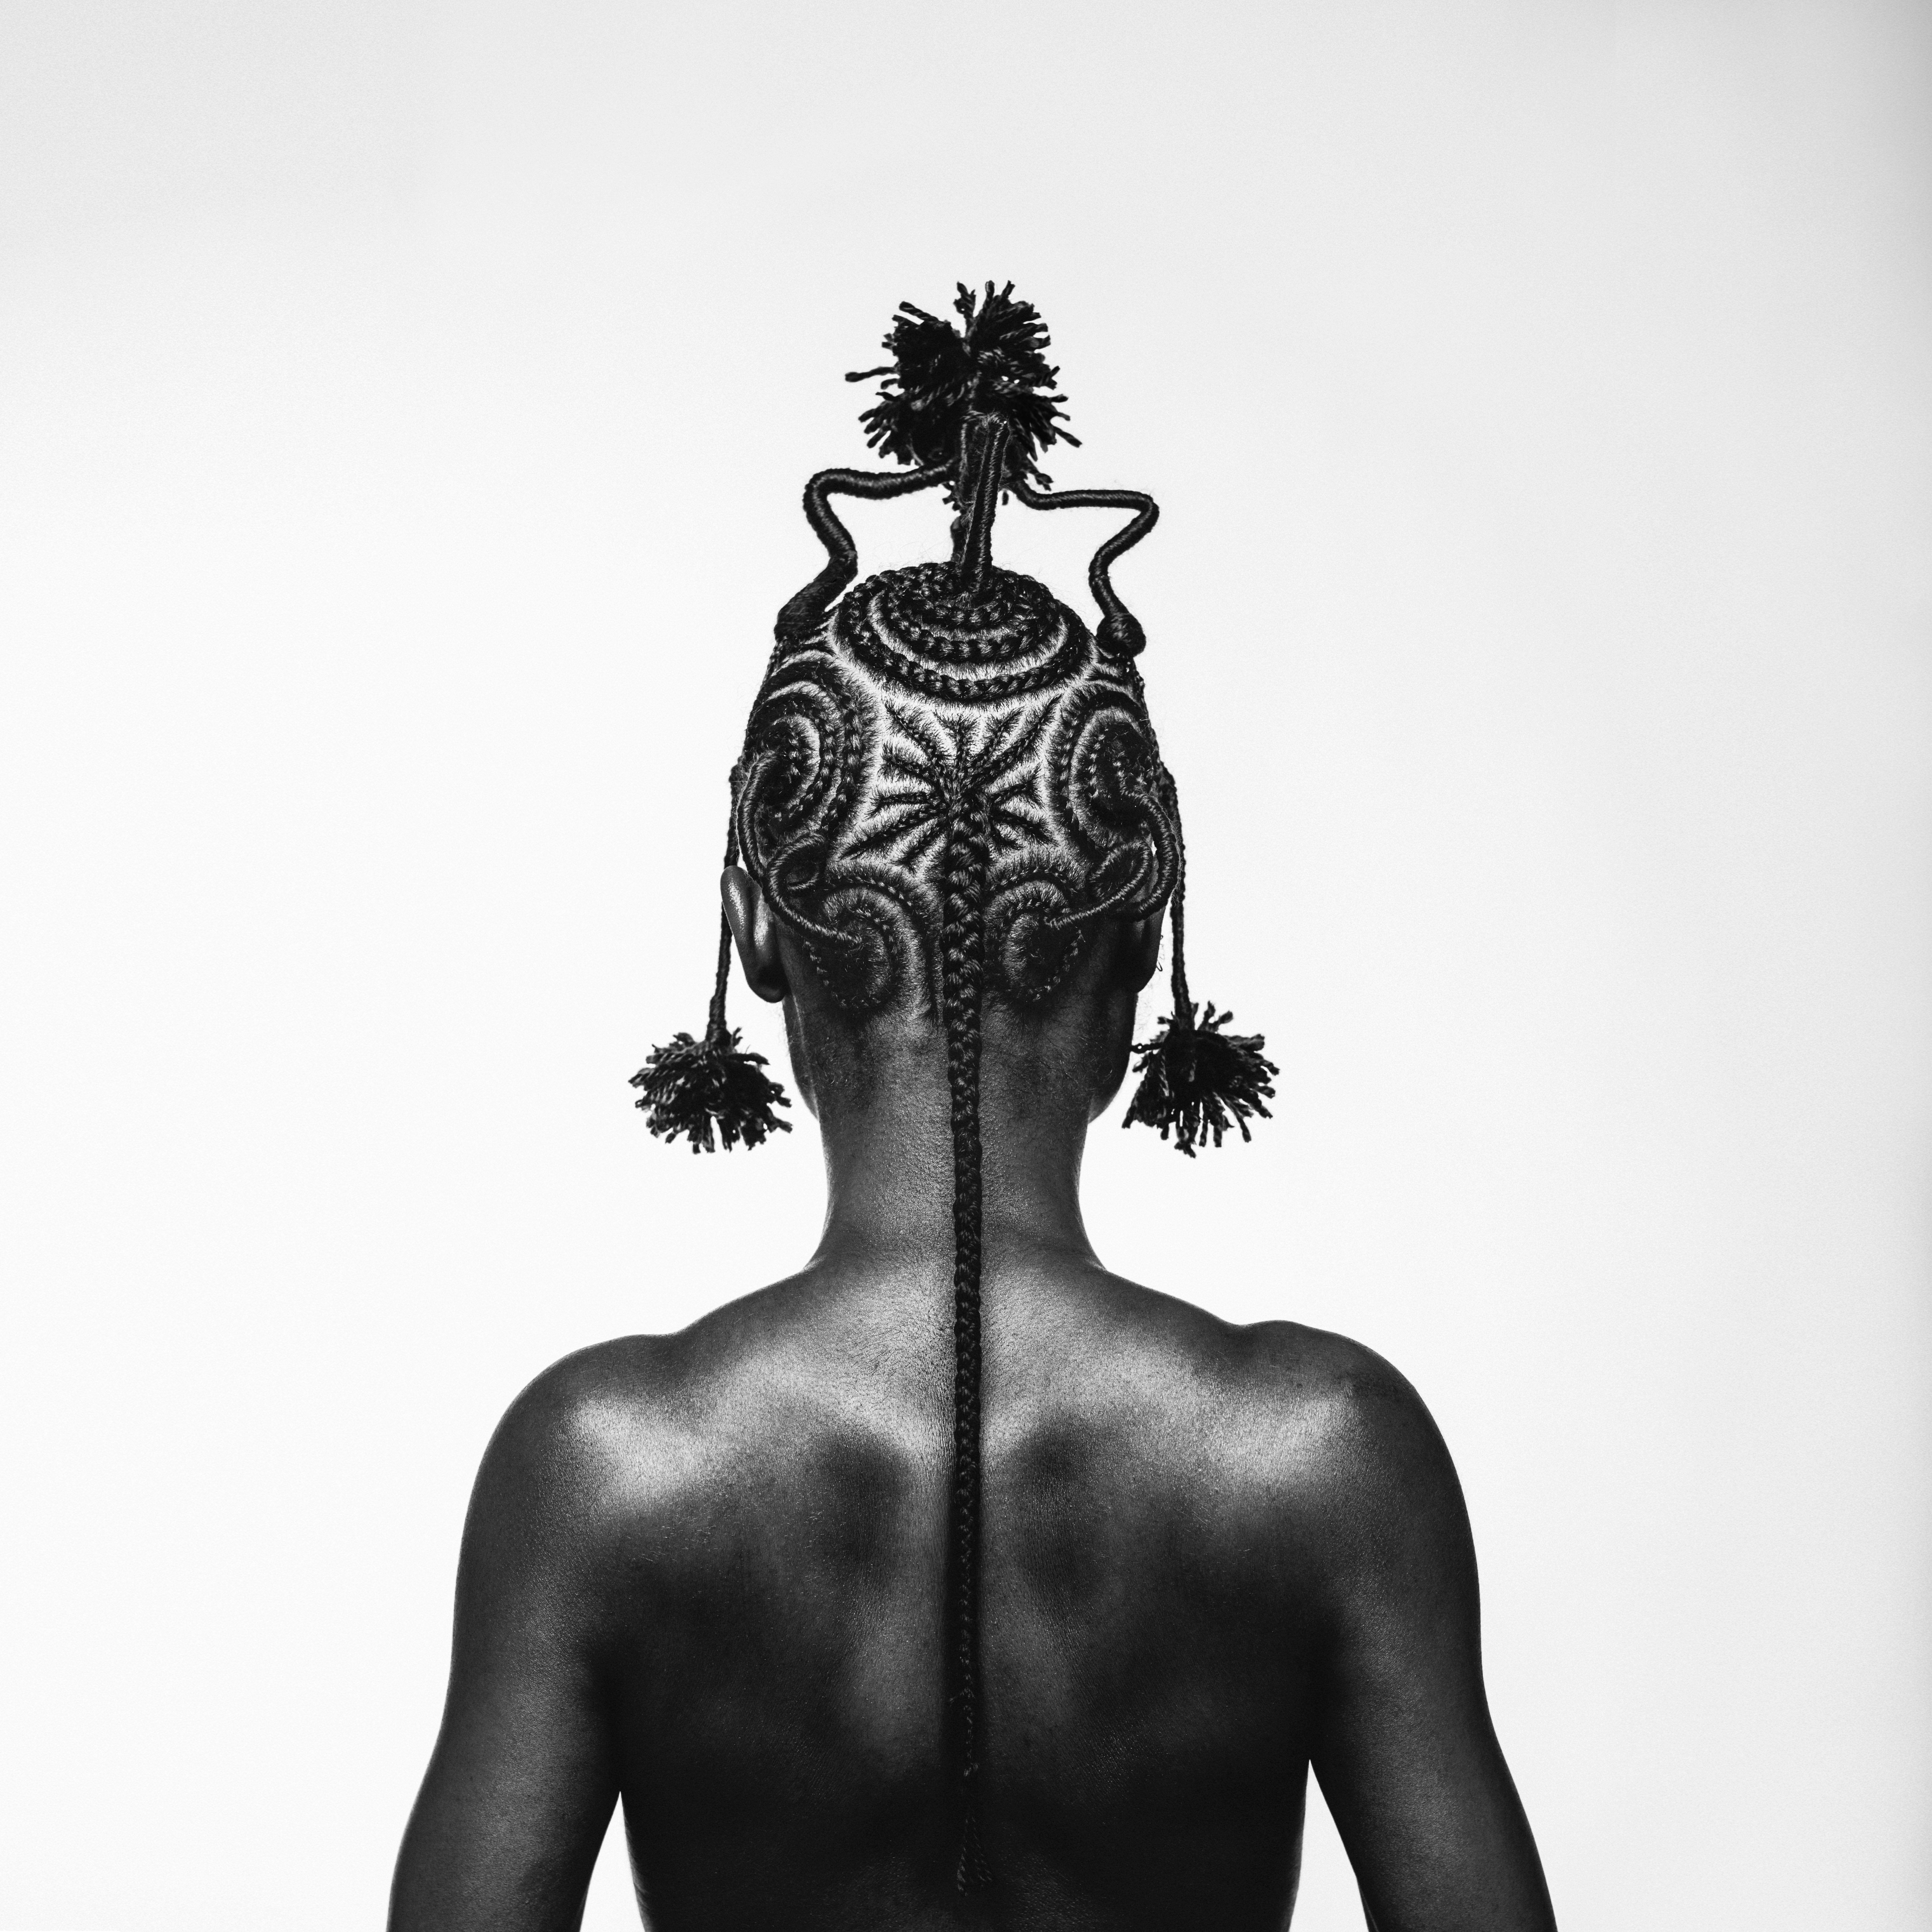 Prepare To Be in Awe of Shani Crowe's BRAIDS Project
